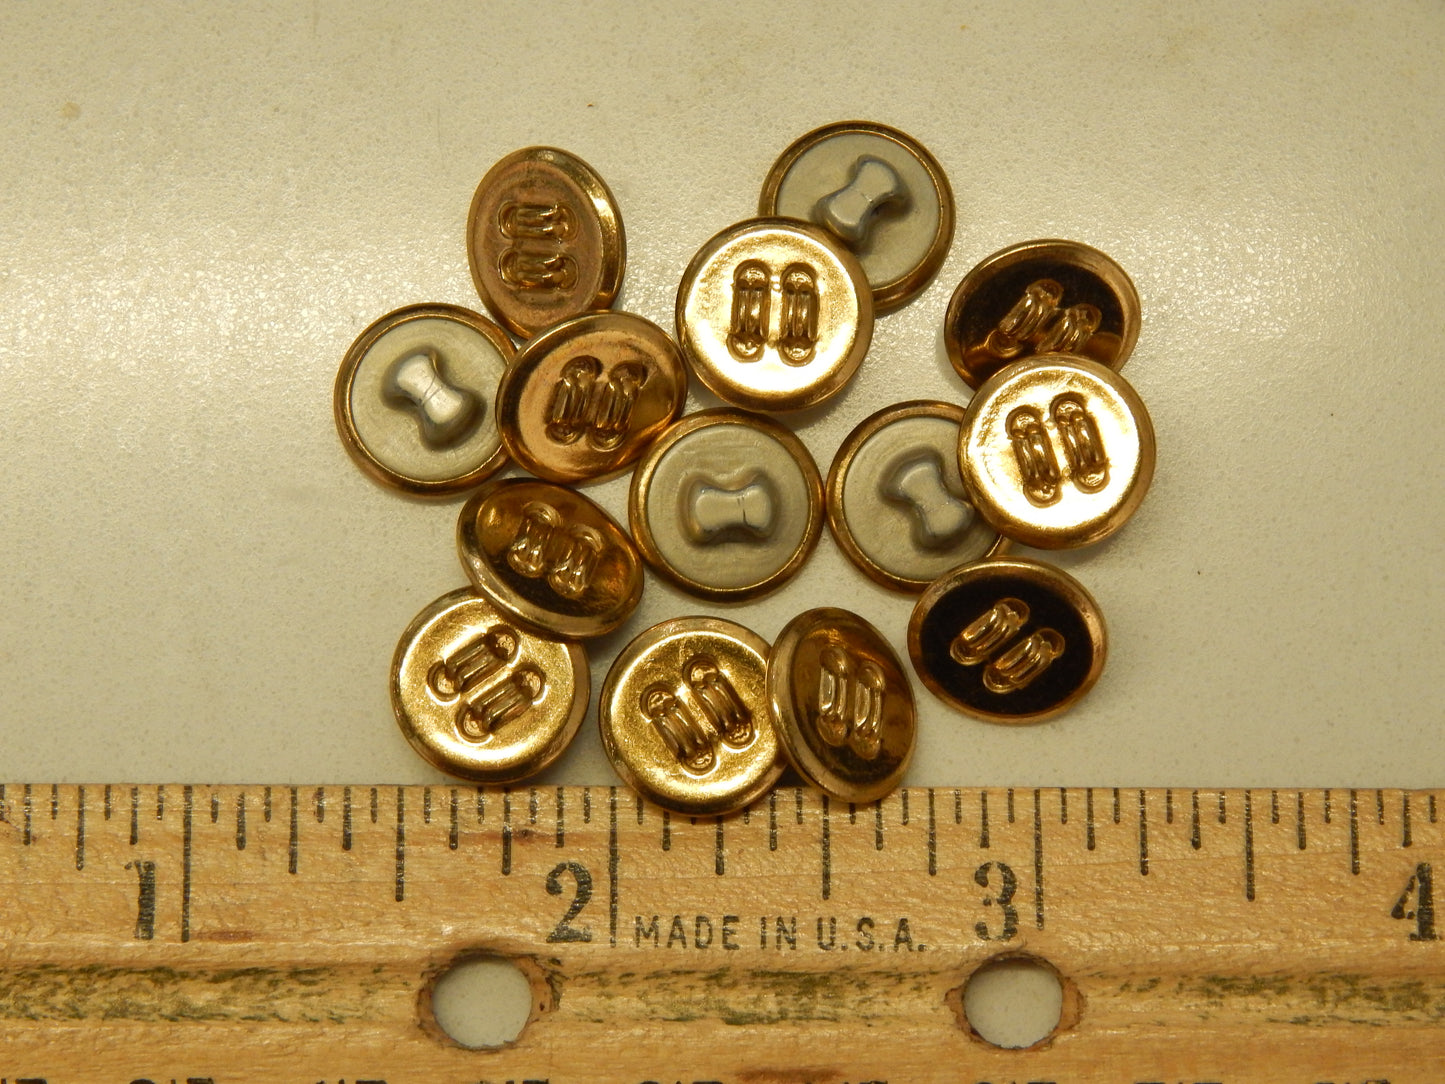 Gold Stitched Buttons